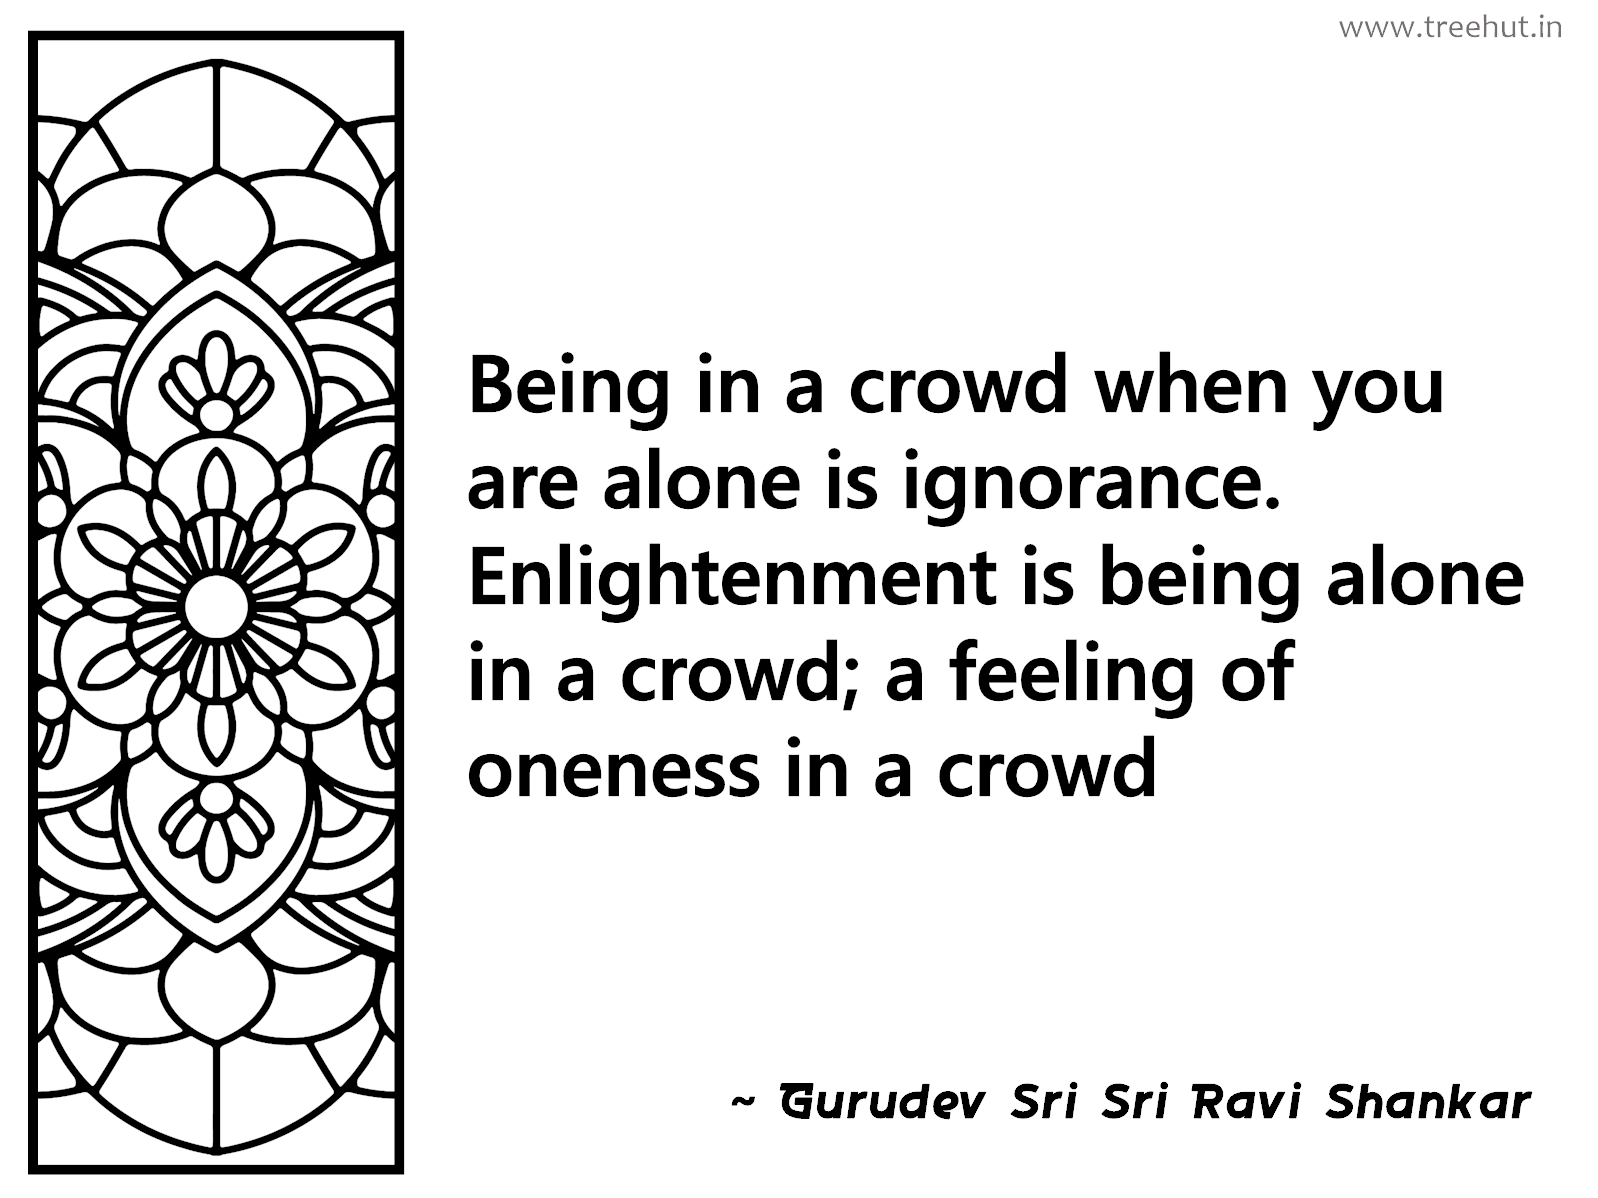 Being in a crowd when you are alone is ignorance. Enlightenment is being alone in a crowd; a feeling of oneness in a crowd Inspirational Quote by Gurudev Sri Sri Ravi Shankar, coloring pages